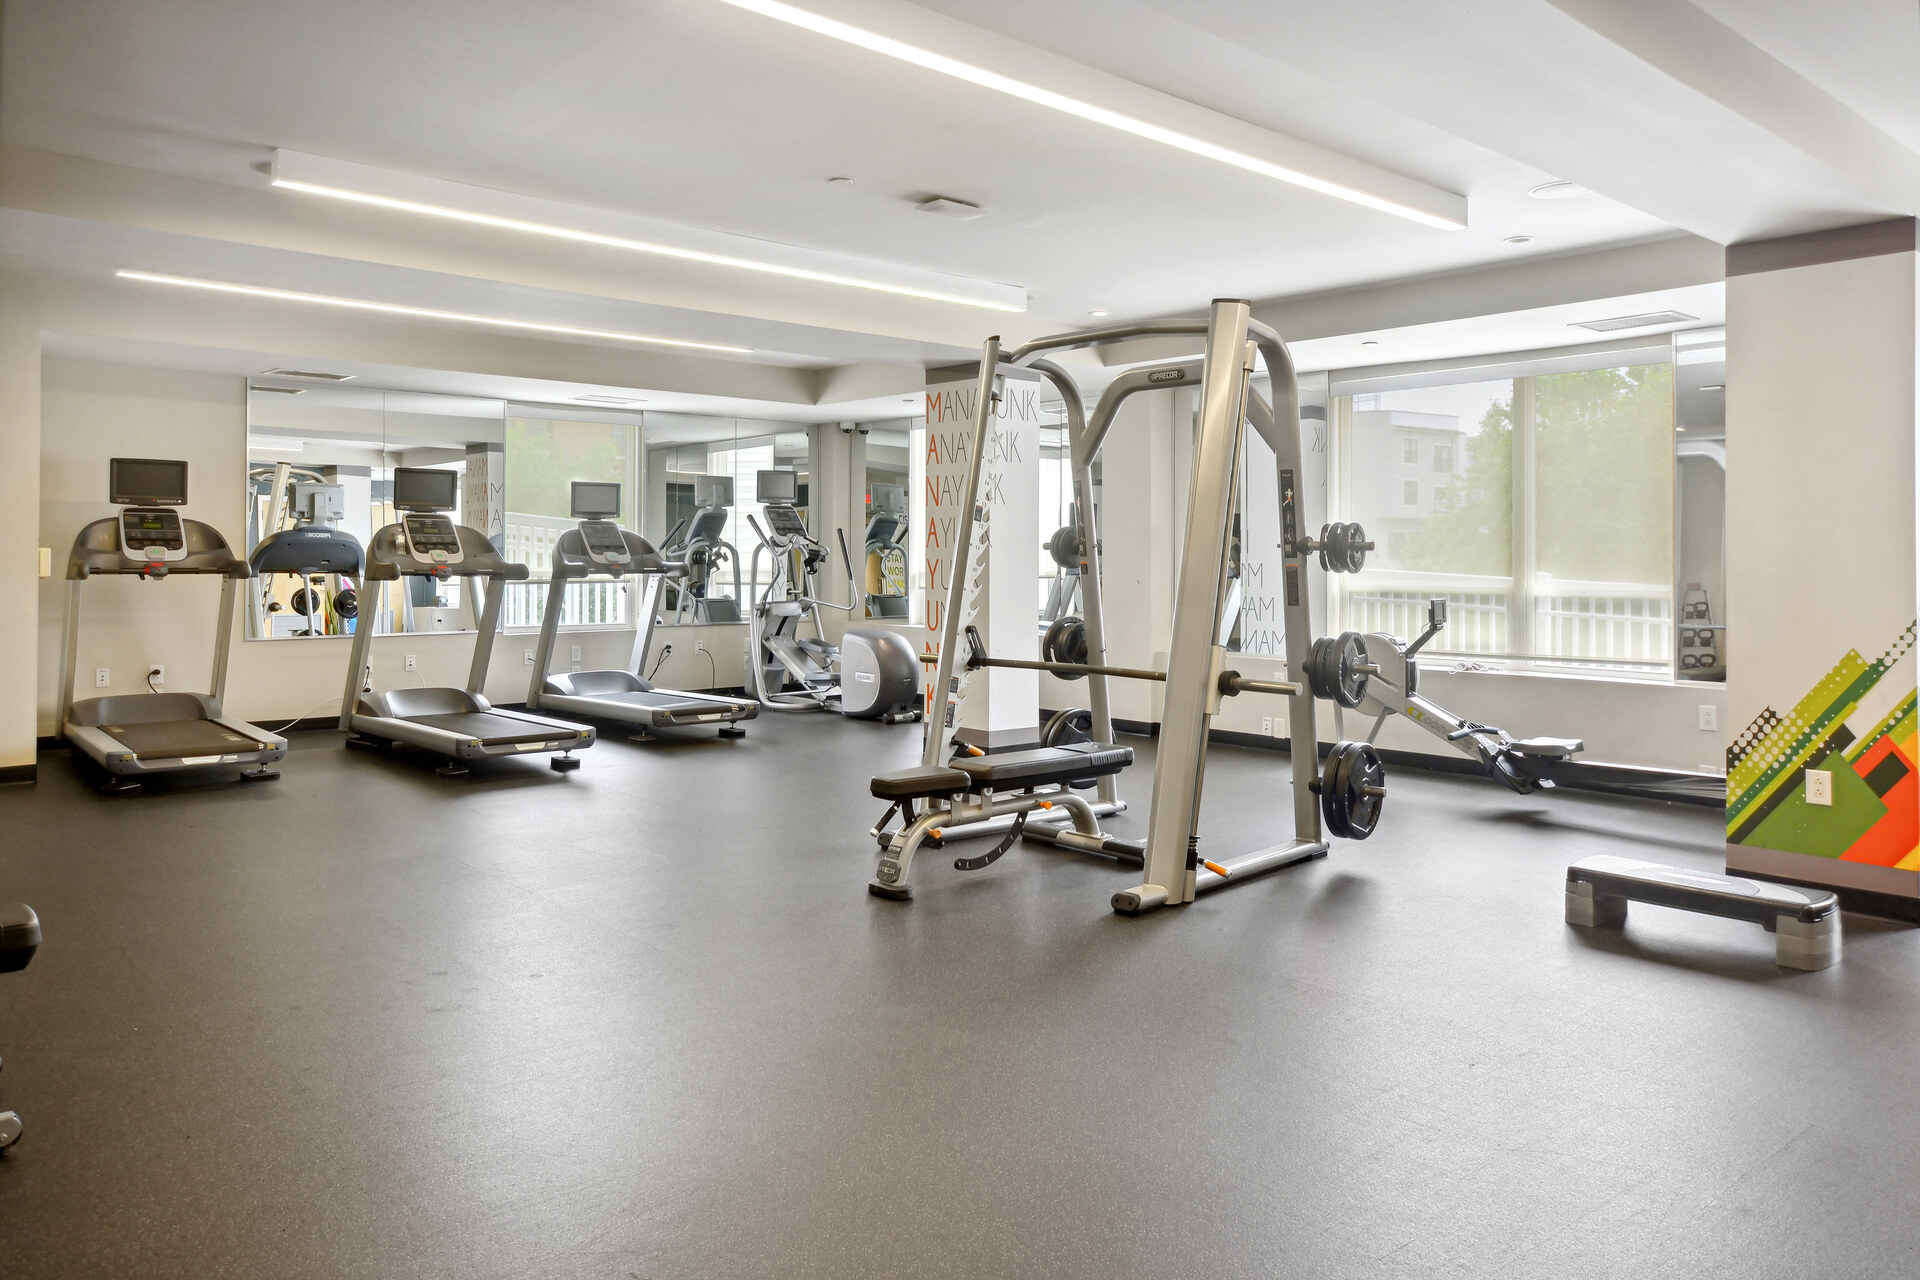 Fitness center with weight and cardio equipment